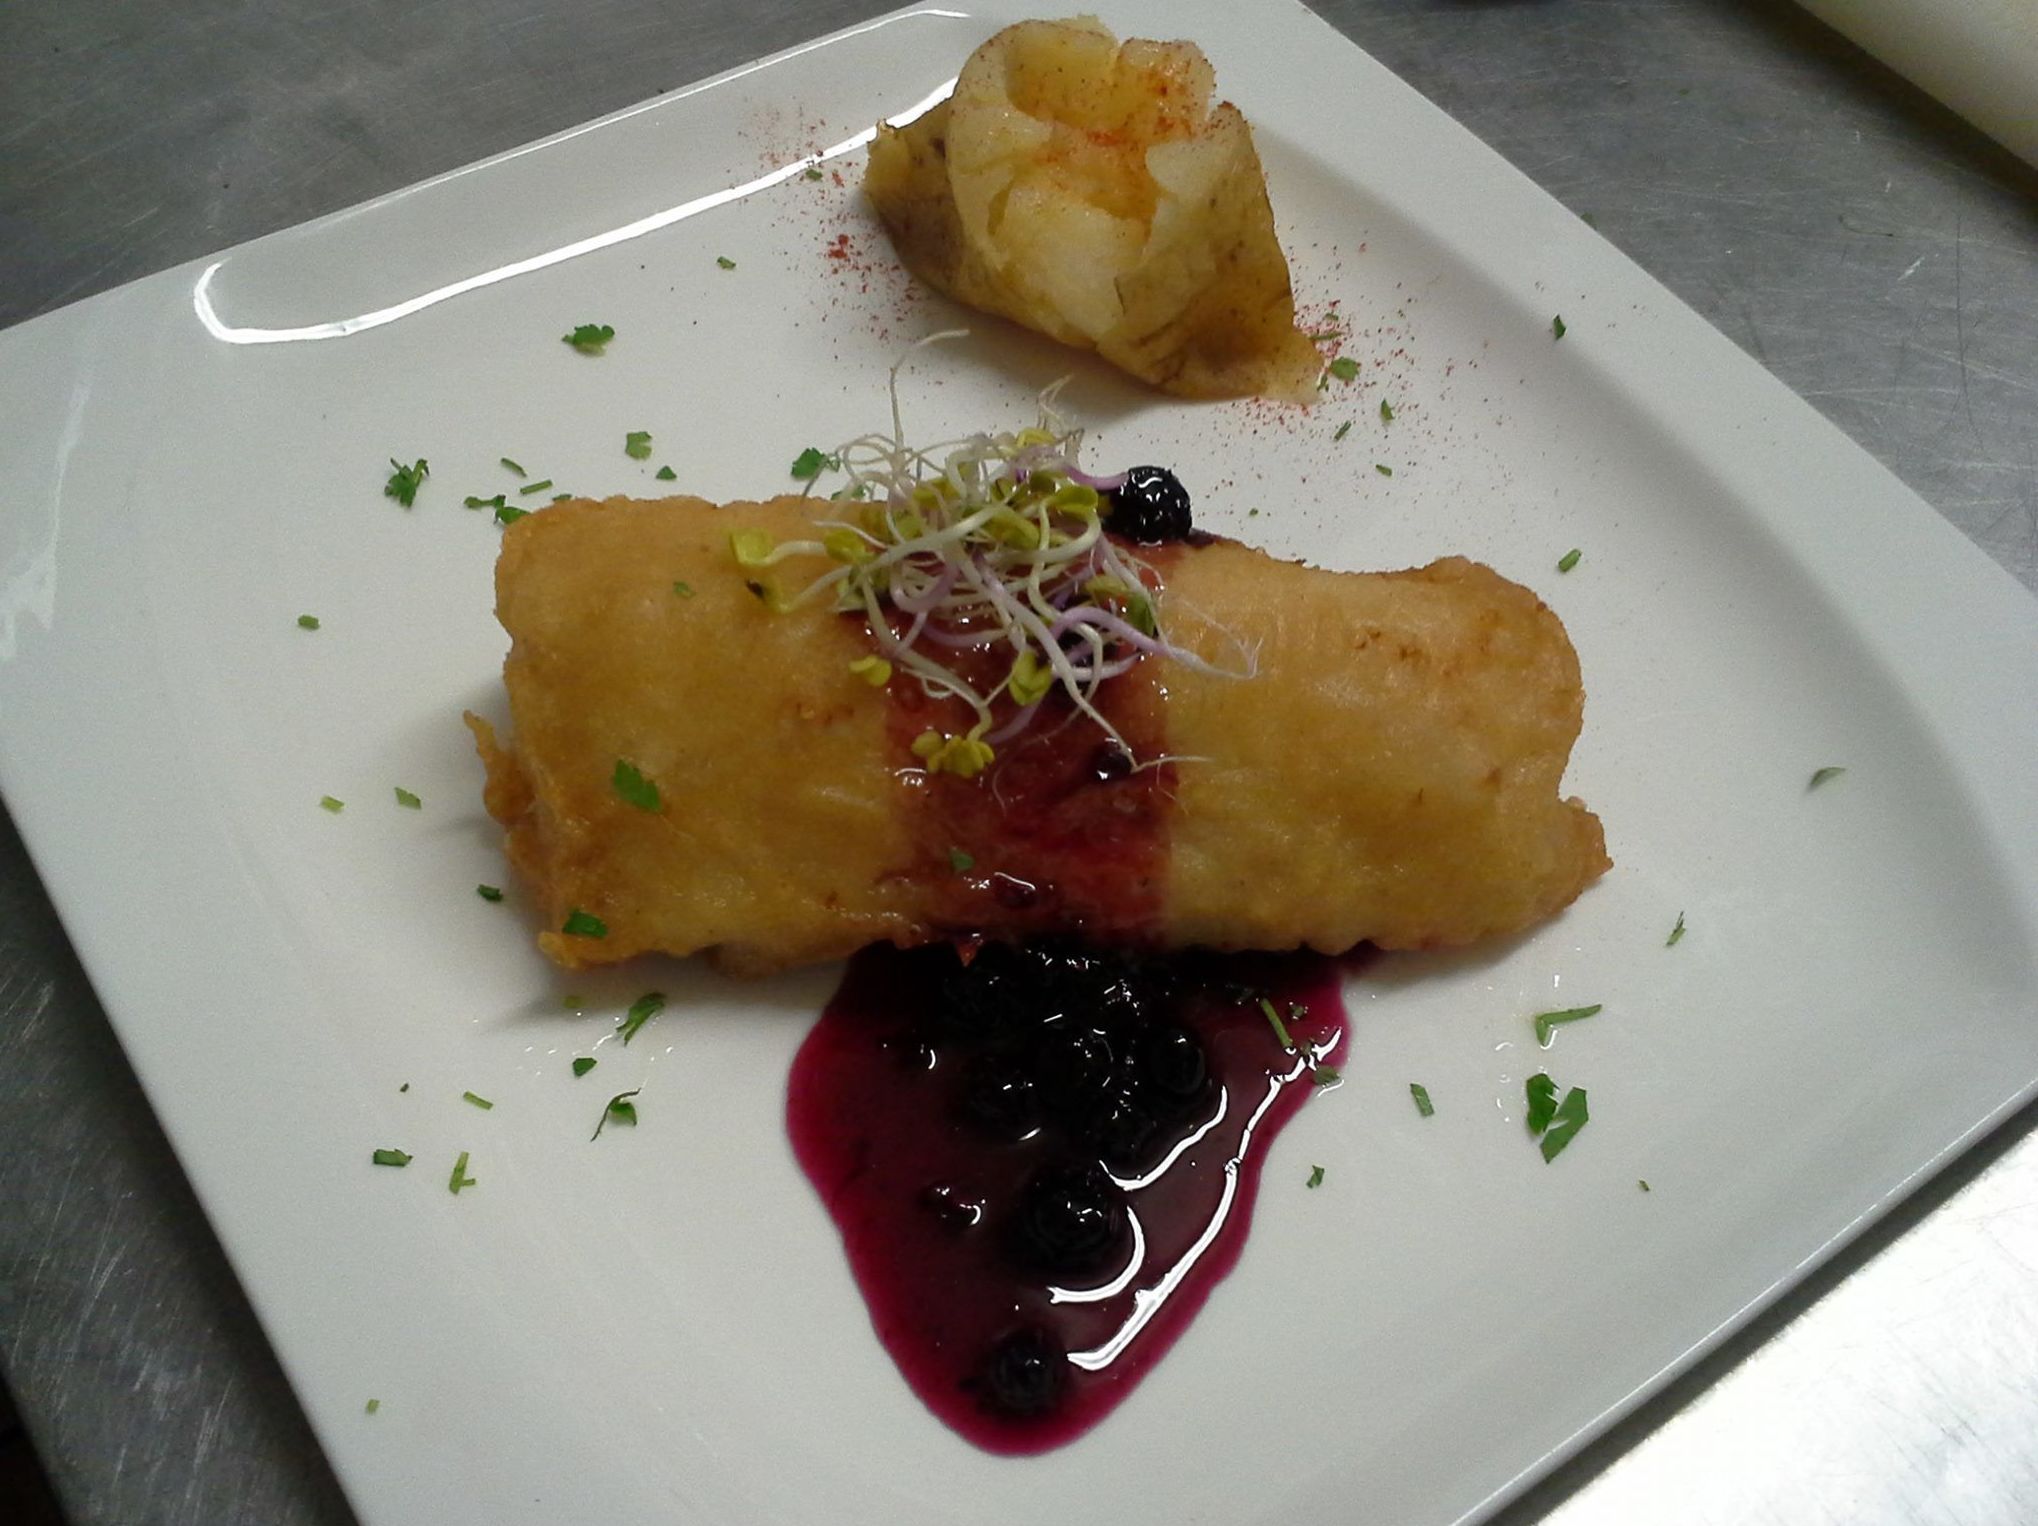 Slices of cod in tempura with red fruits confit